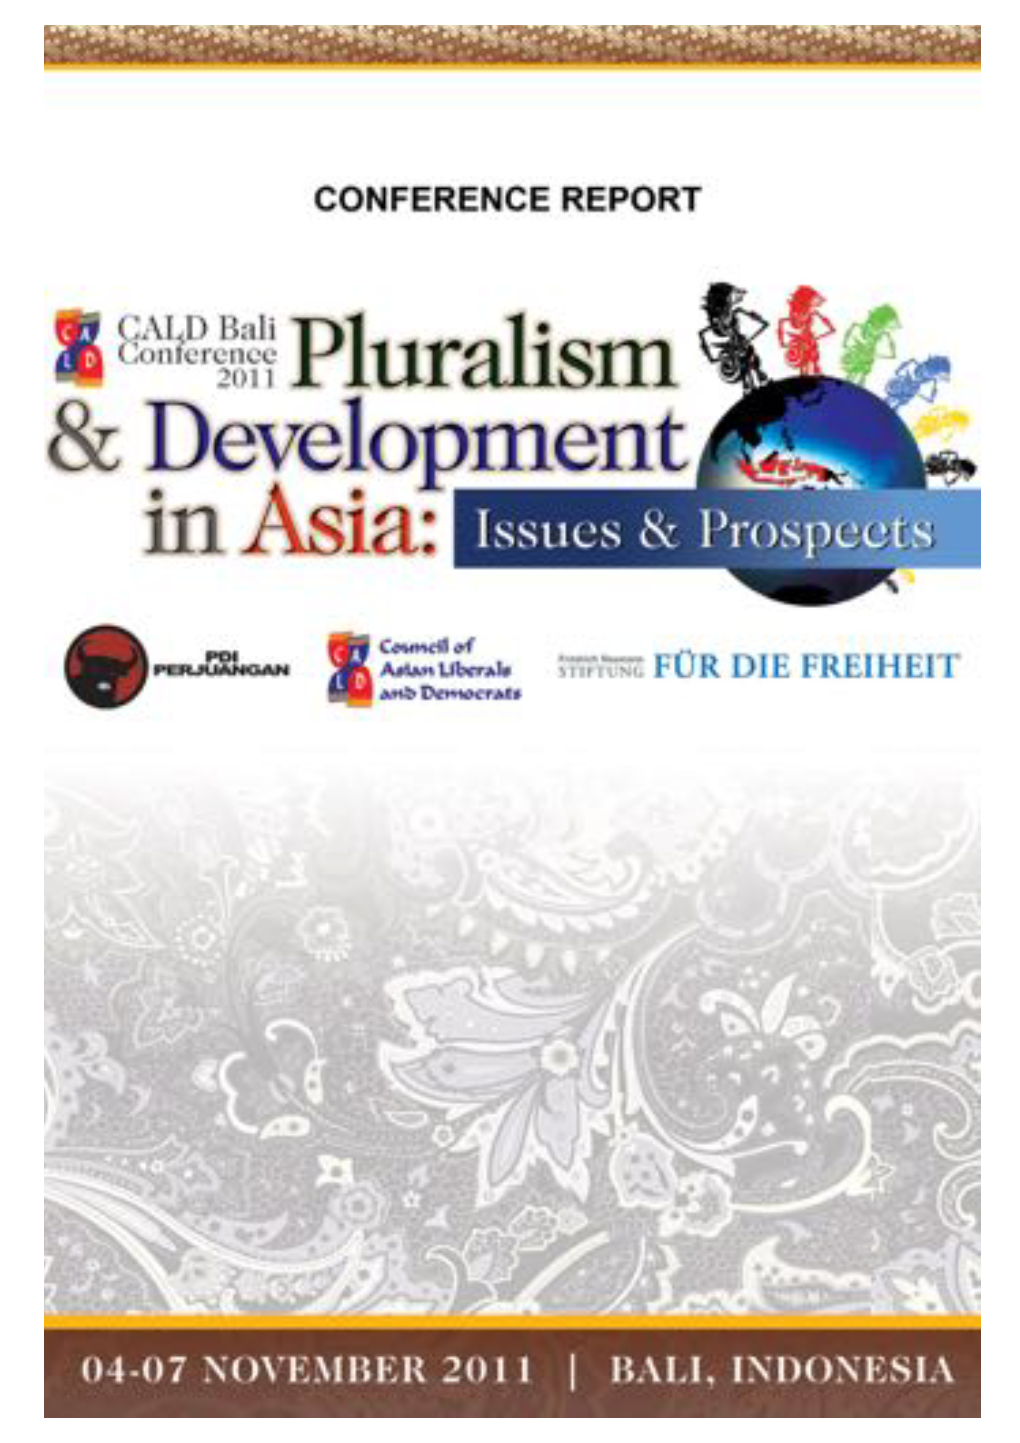 CALD Bali Conference on Pluralism and Development